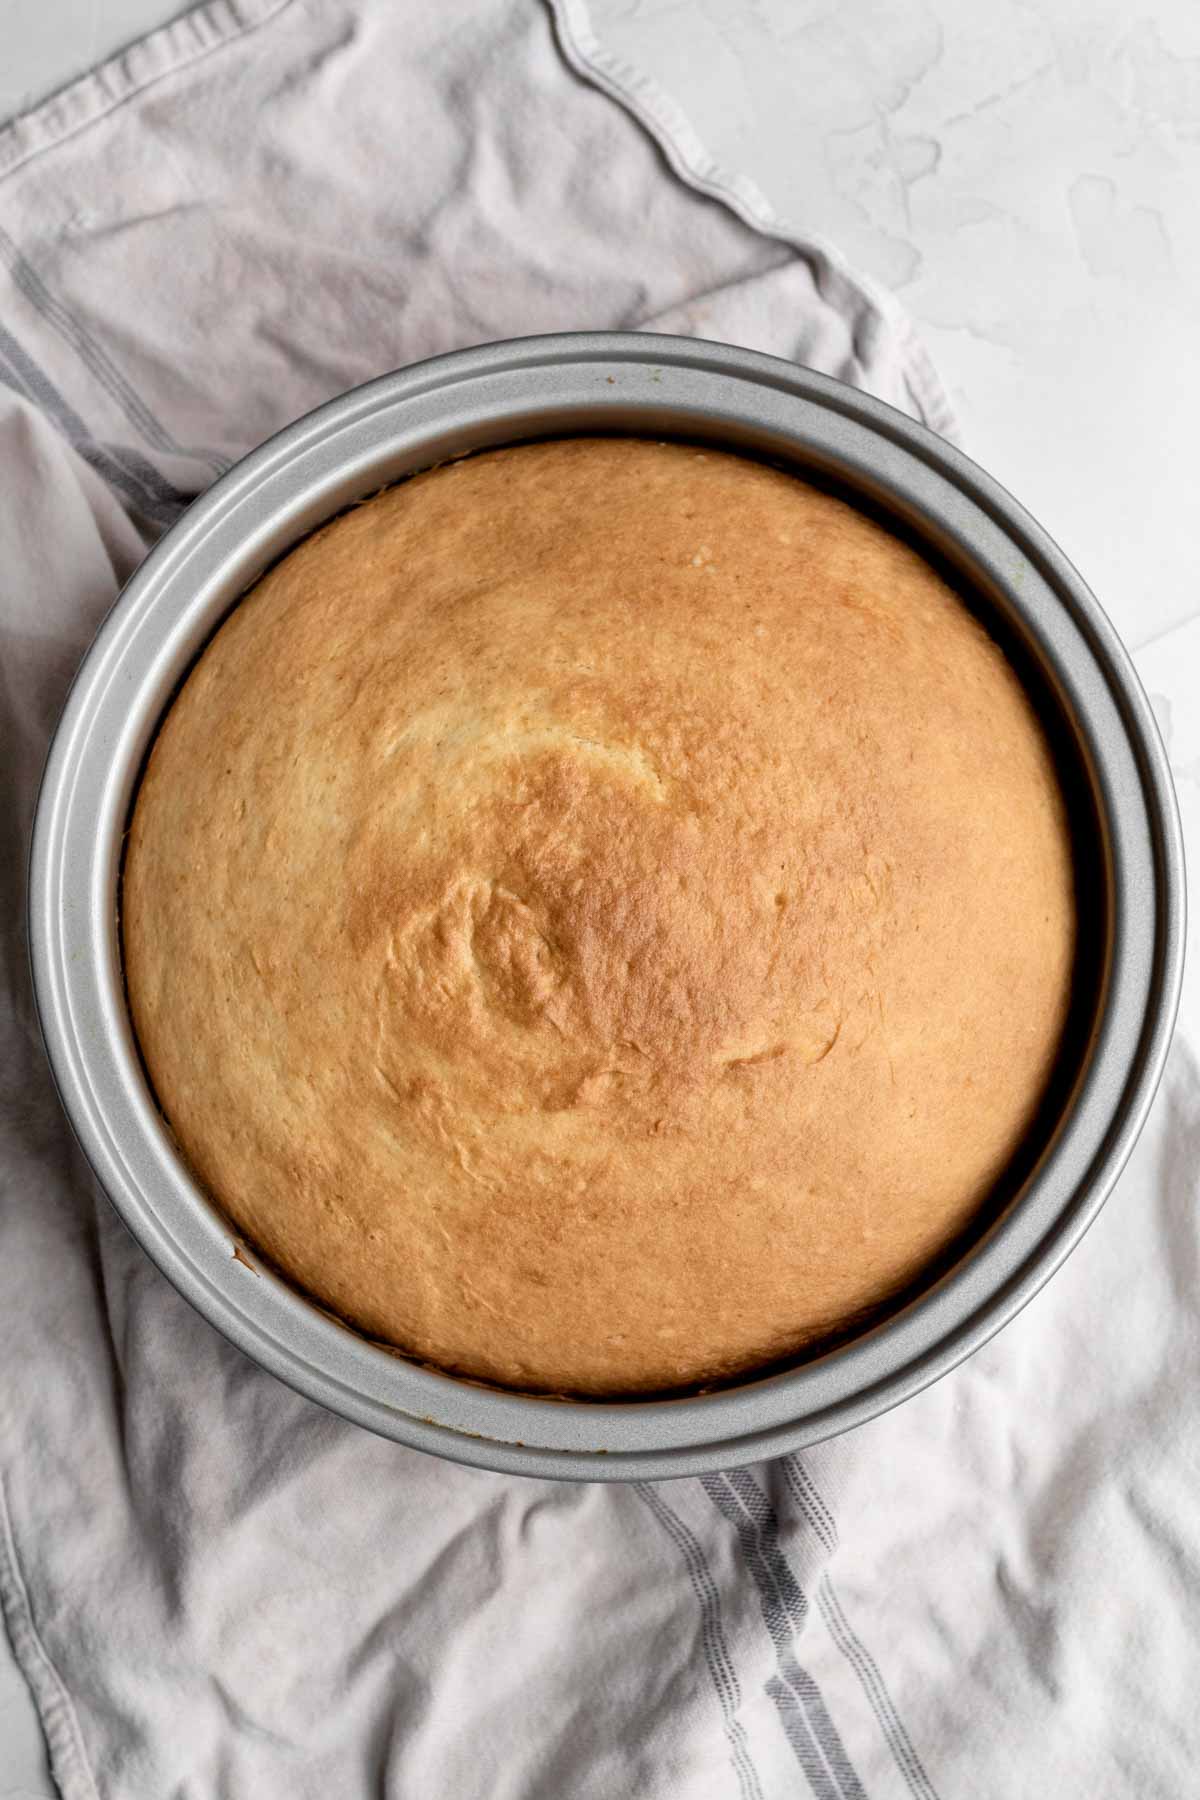 Golden brown cake in a silver cake pan.